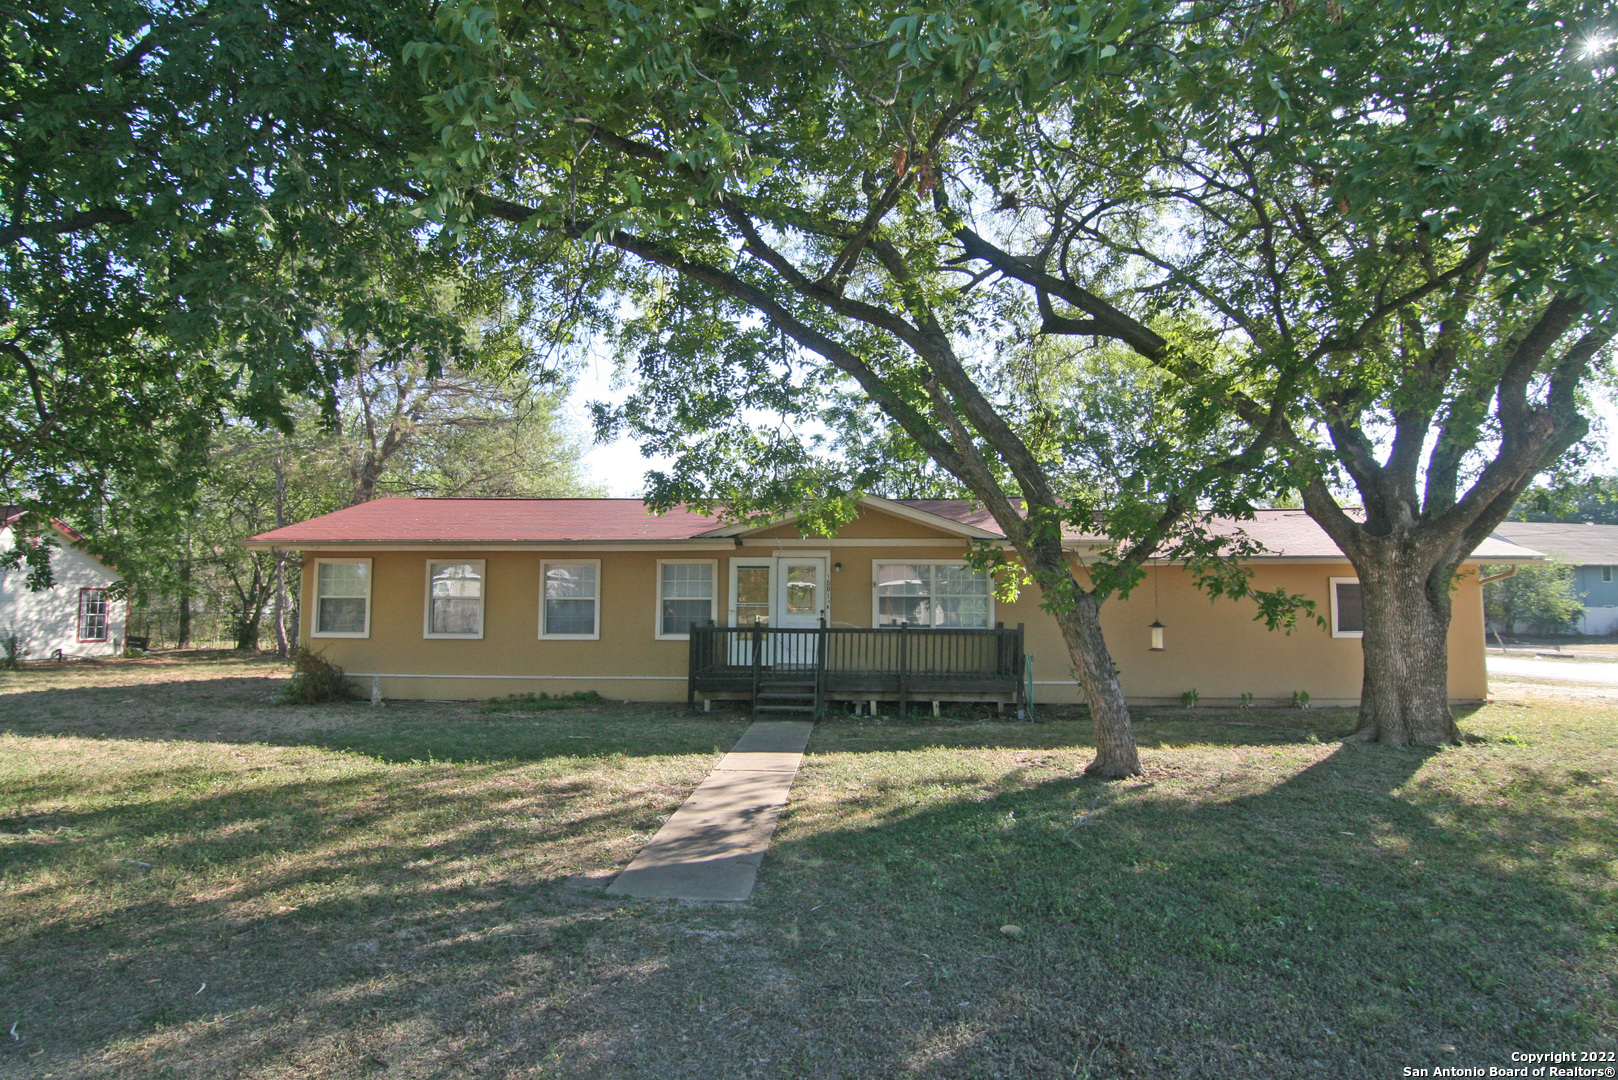 Unique investment property or starter home near downtown Castroville. This property includes two homes, a 1,152 sf home with 2 Bedrooms, Study/Office and 1 Bath as well as a detached 576 sf cottage currently used as a rental. (Shown by appt. only.)  The home has a large Living Room, spacious Bath and has had some recent renovations.  Situated on a large .31-acre lot with mature trees, this home is within walking distance of Castroville Elementary.